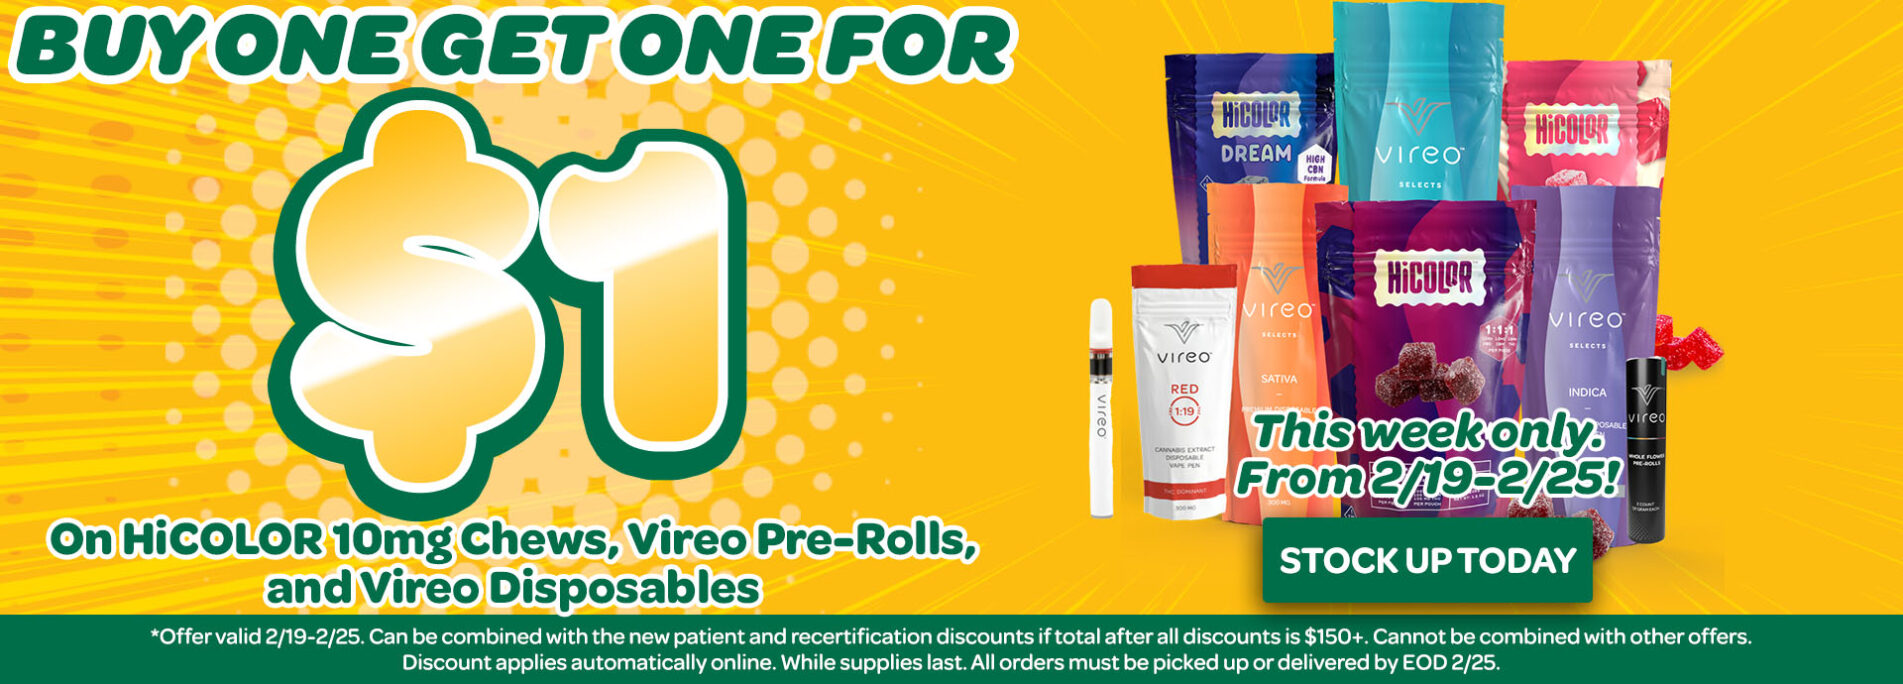 BOGO for $1 HiCOLOR & Vireo at Vireo Health!